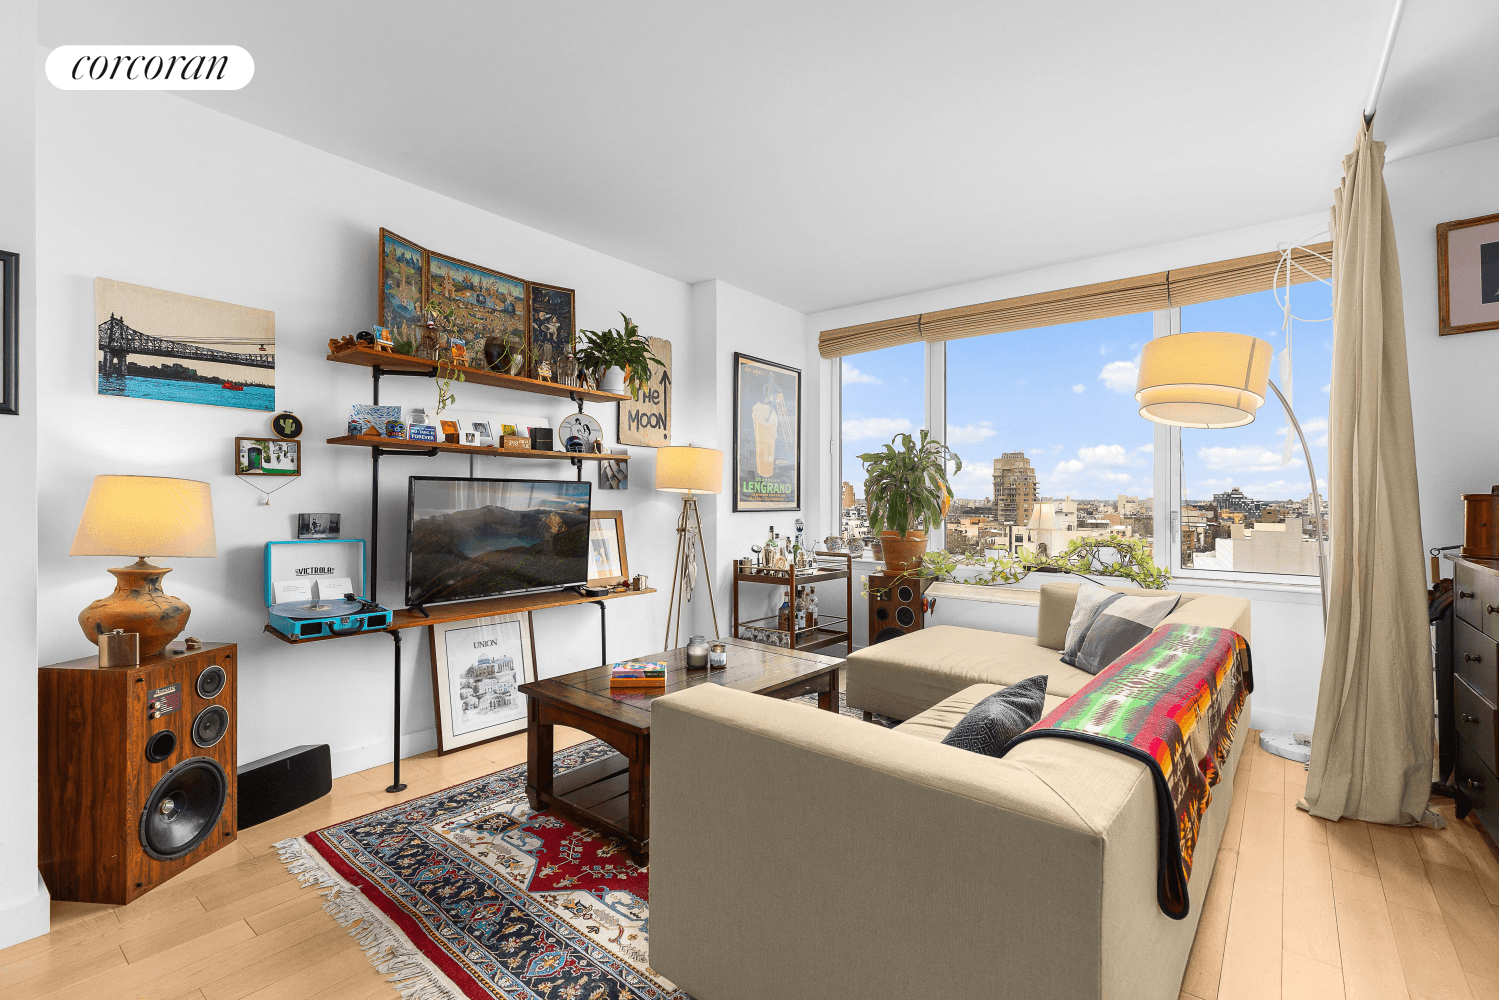 Welcome to apartment 12i, a gorgeous, rarely available Alcove Studio on the Williamsburg Waterfront.